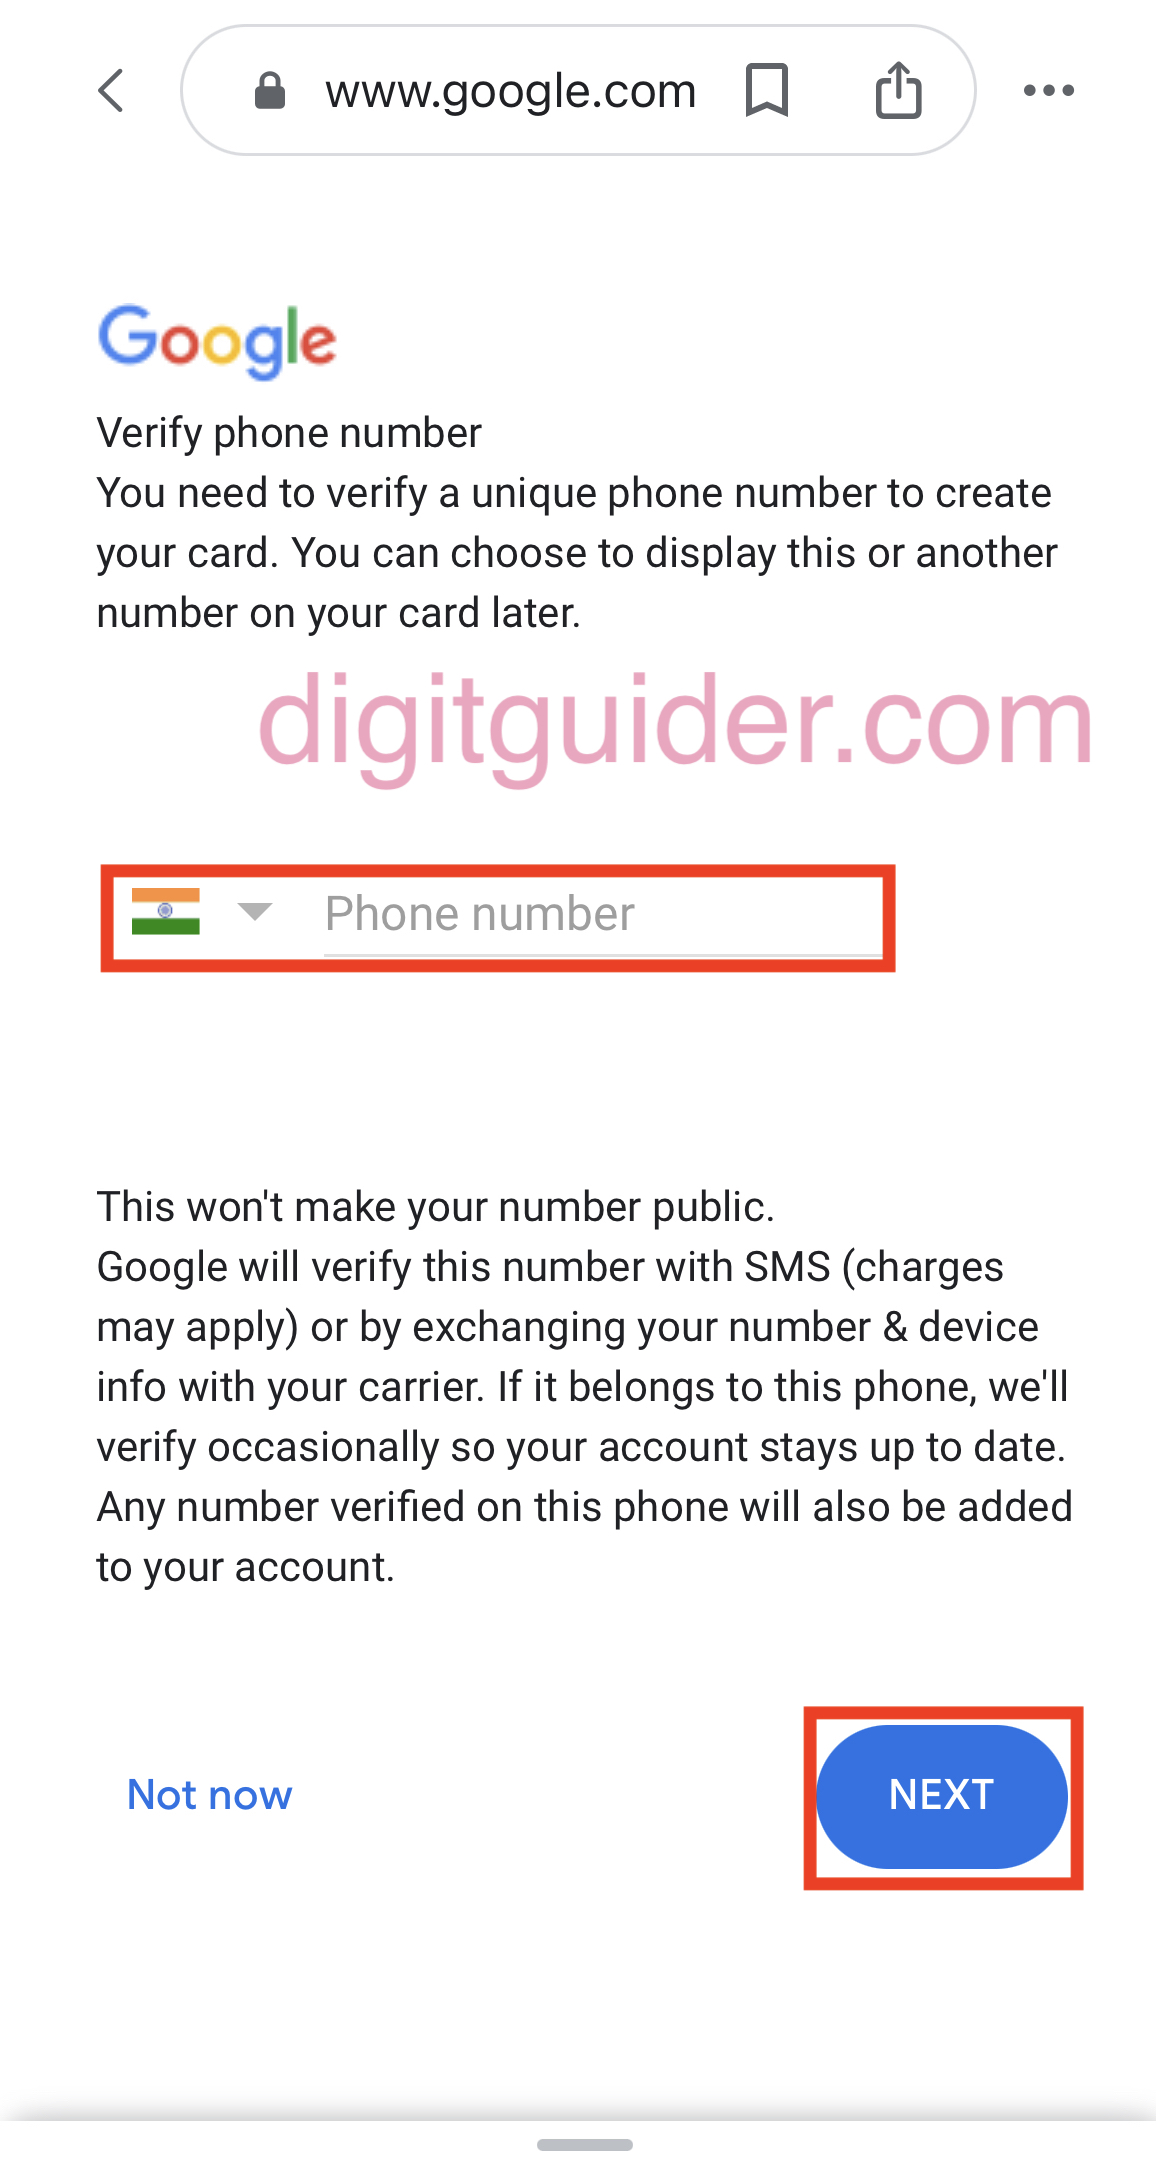 Verify phone number to get started